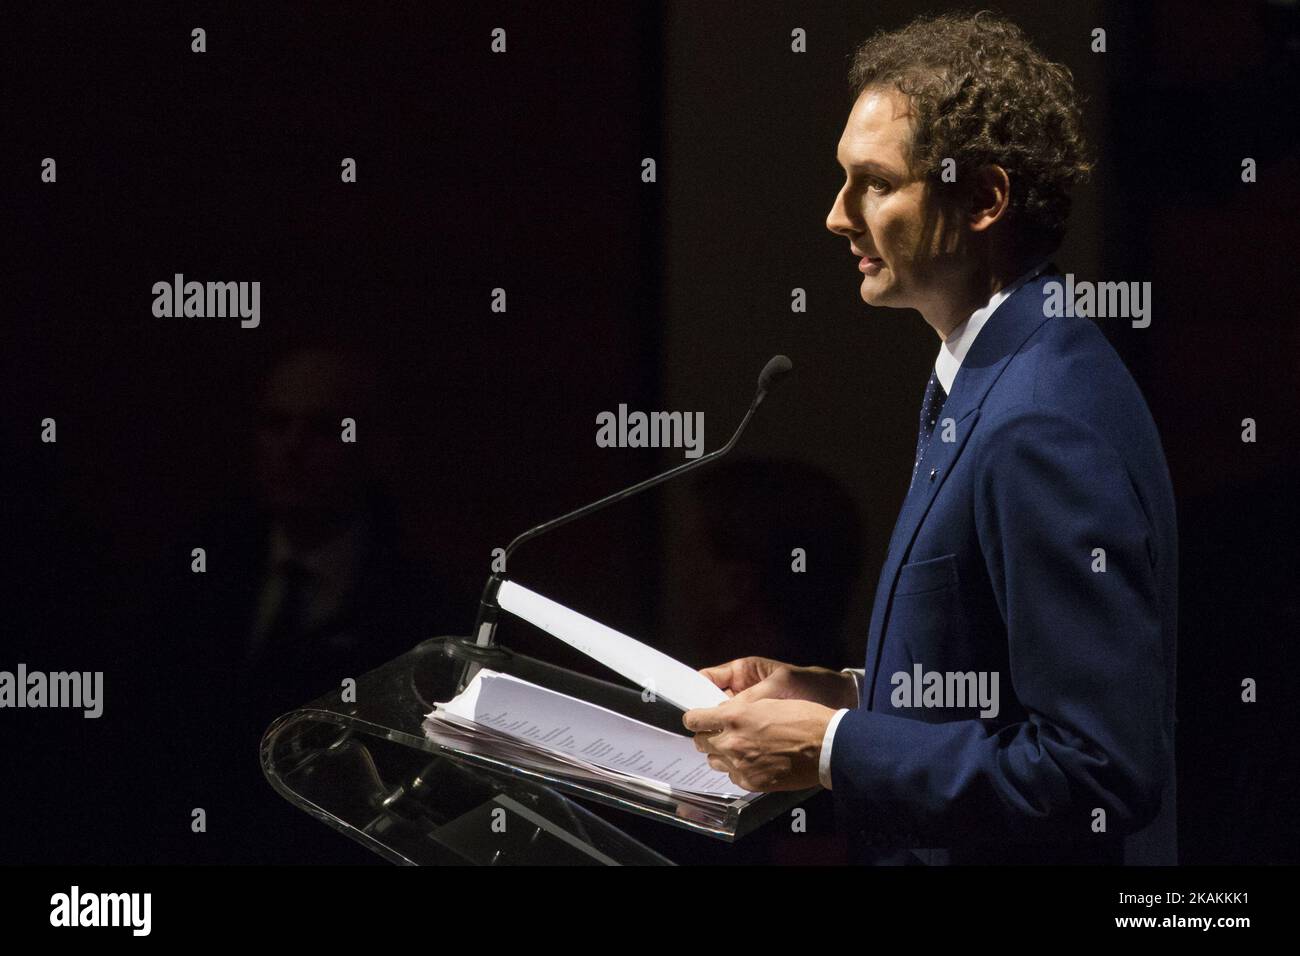 John Elkan the chairman of Editrice La Stampa speaks during the 150th anniversary of foundation of italian newspaper La Stampa at Auditorium Giovanni Agnelli at Lingotto in Turin, Italy on February 9, 2017. At the event were present many celebrities in particular the Italian president Sergio Mattarella, John Elkann and Sergio Marchionne. (Photo by Mauro Ujetto/NurPhoto) *** Please Use Credit from Credit Field *** Stock Photo